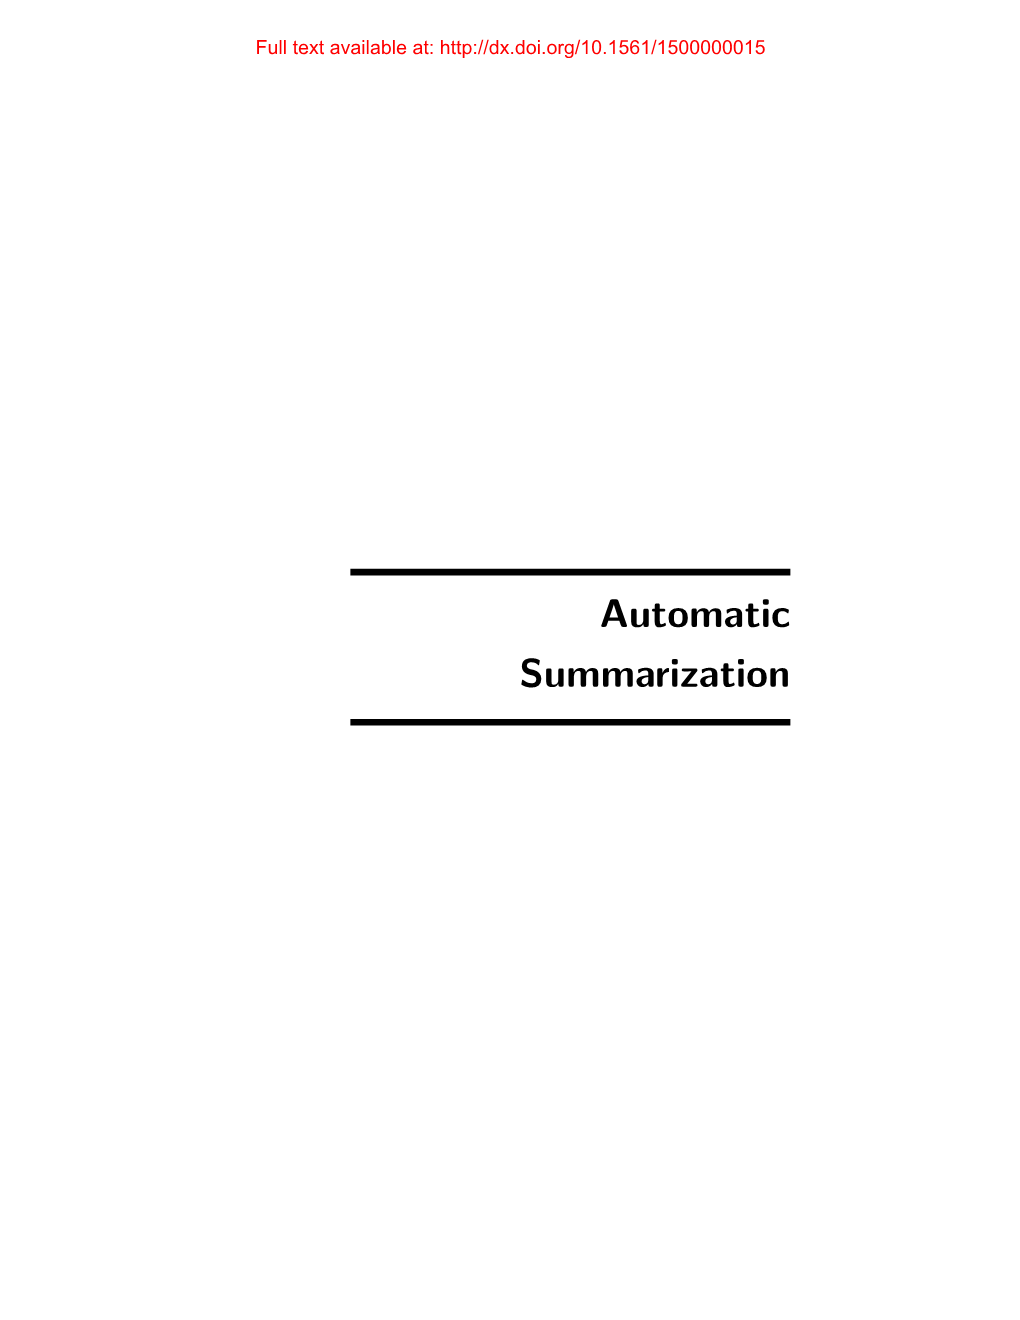 Automatic Summarization Full Text Available At